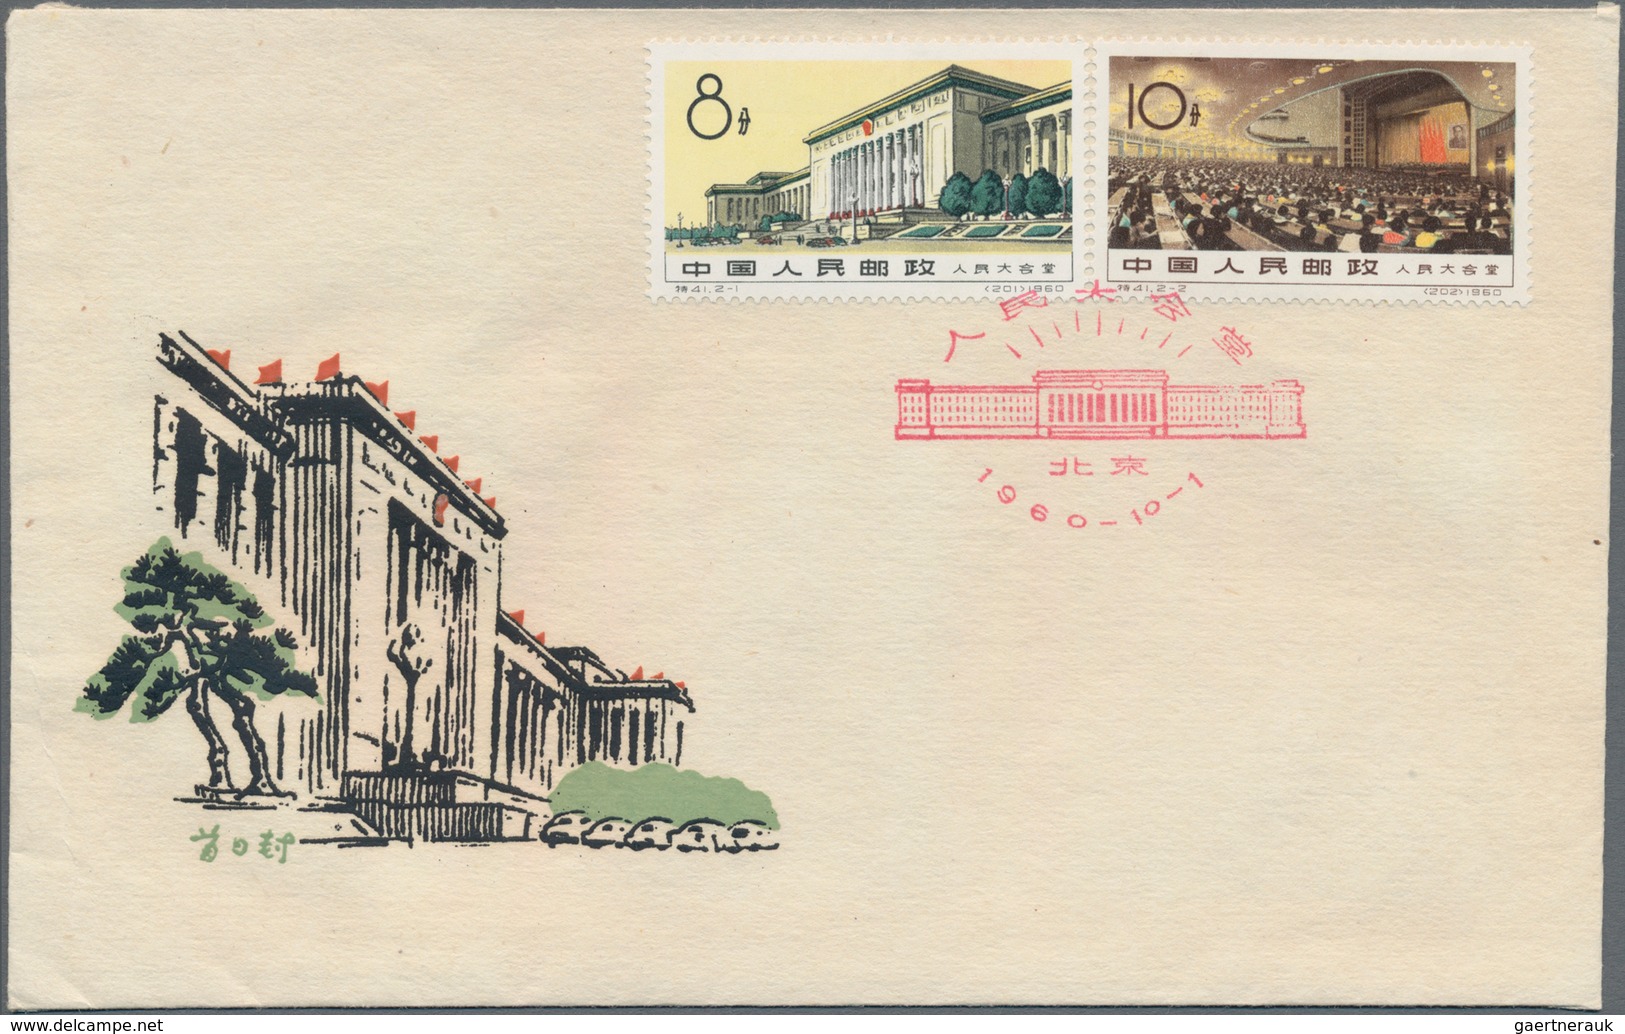 China - Volksrepublik: 1960, 5 FDCs Bearing The Michel 559/69, And 576 (S32, S41, S43, C80, C84), Ti - Lettres & Documents